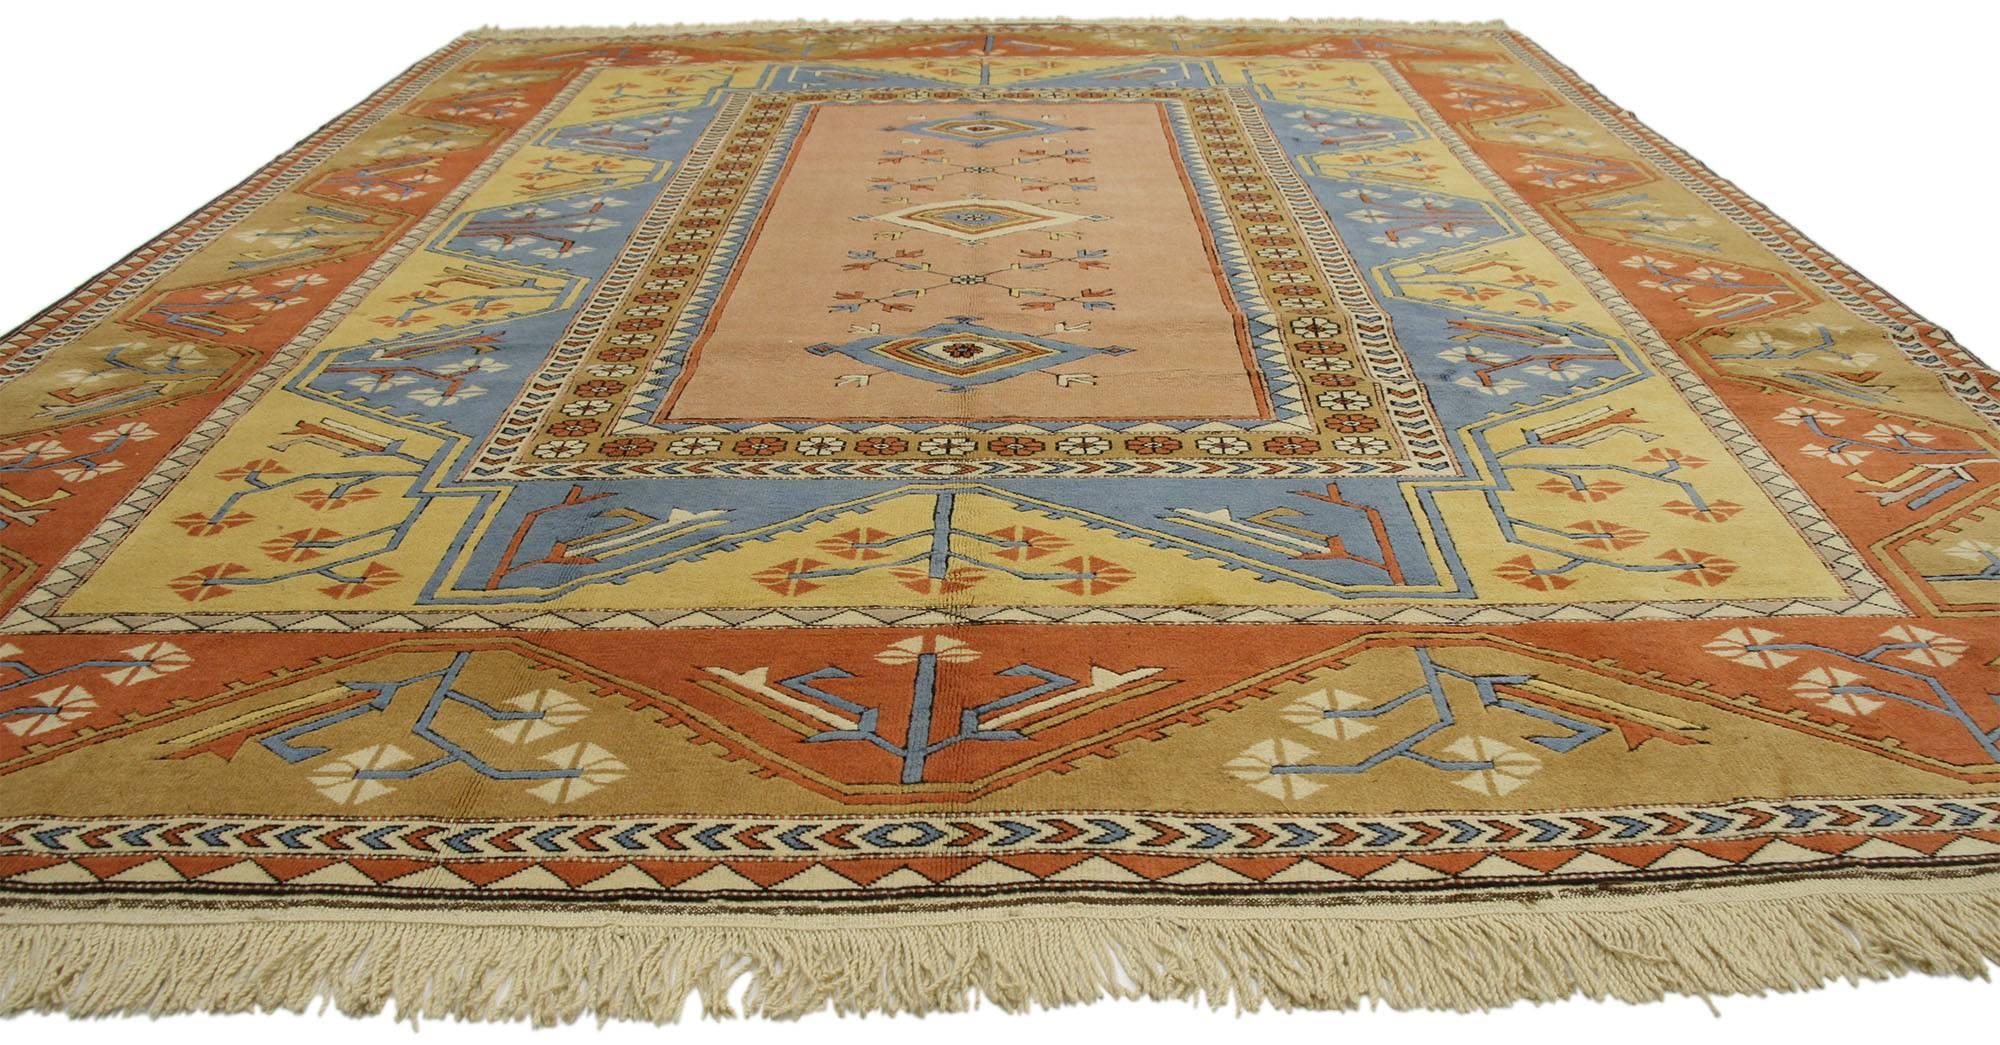 77132, vintage Turkish Oushak rug. This hand-knotted wool vintage Turkish Oushak rug features rectangular medallion filled with three diamond motifs and cross-like sprigs surrounded by a rosette border in cut out field of blue and yellow.